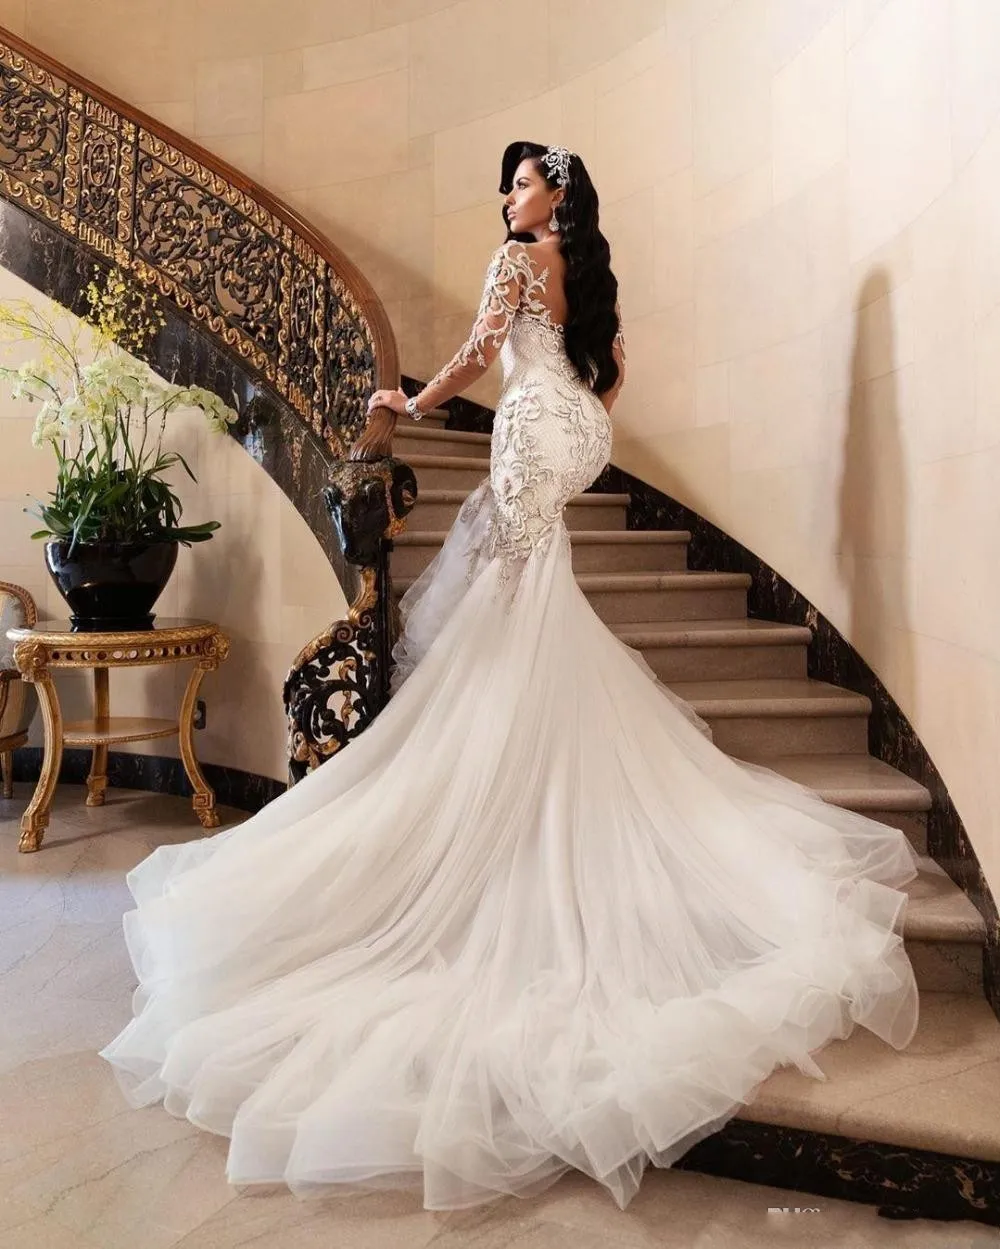 Luxury Arabic Mermaid Wedding Dresses Dubai Sparkly Crystals Long Sleeves Bridal Gowns Court Train Tulle Skirt robes BC3345